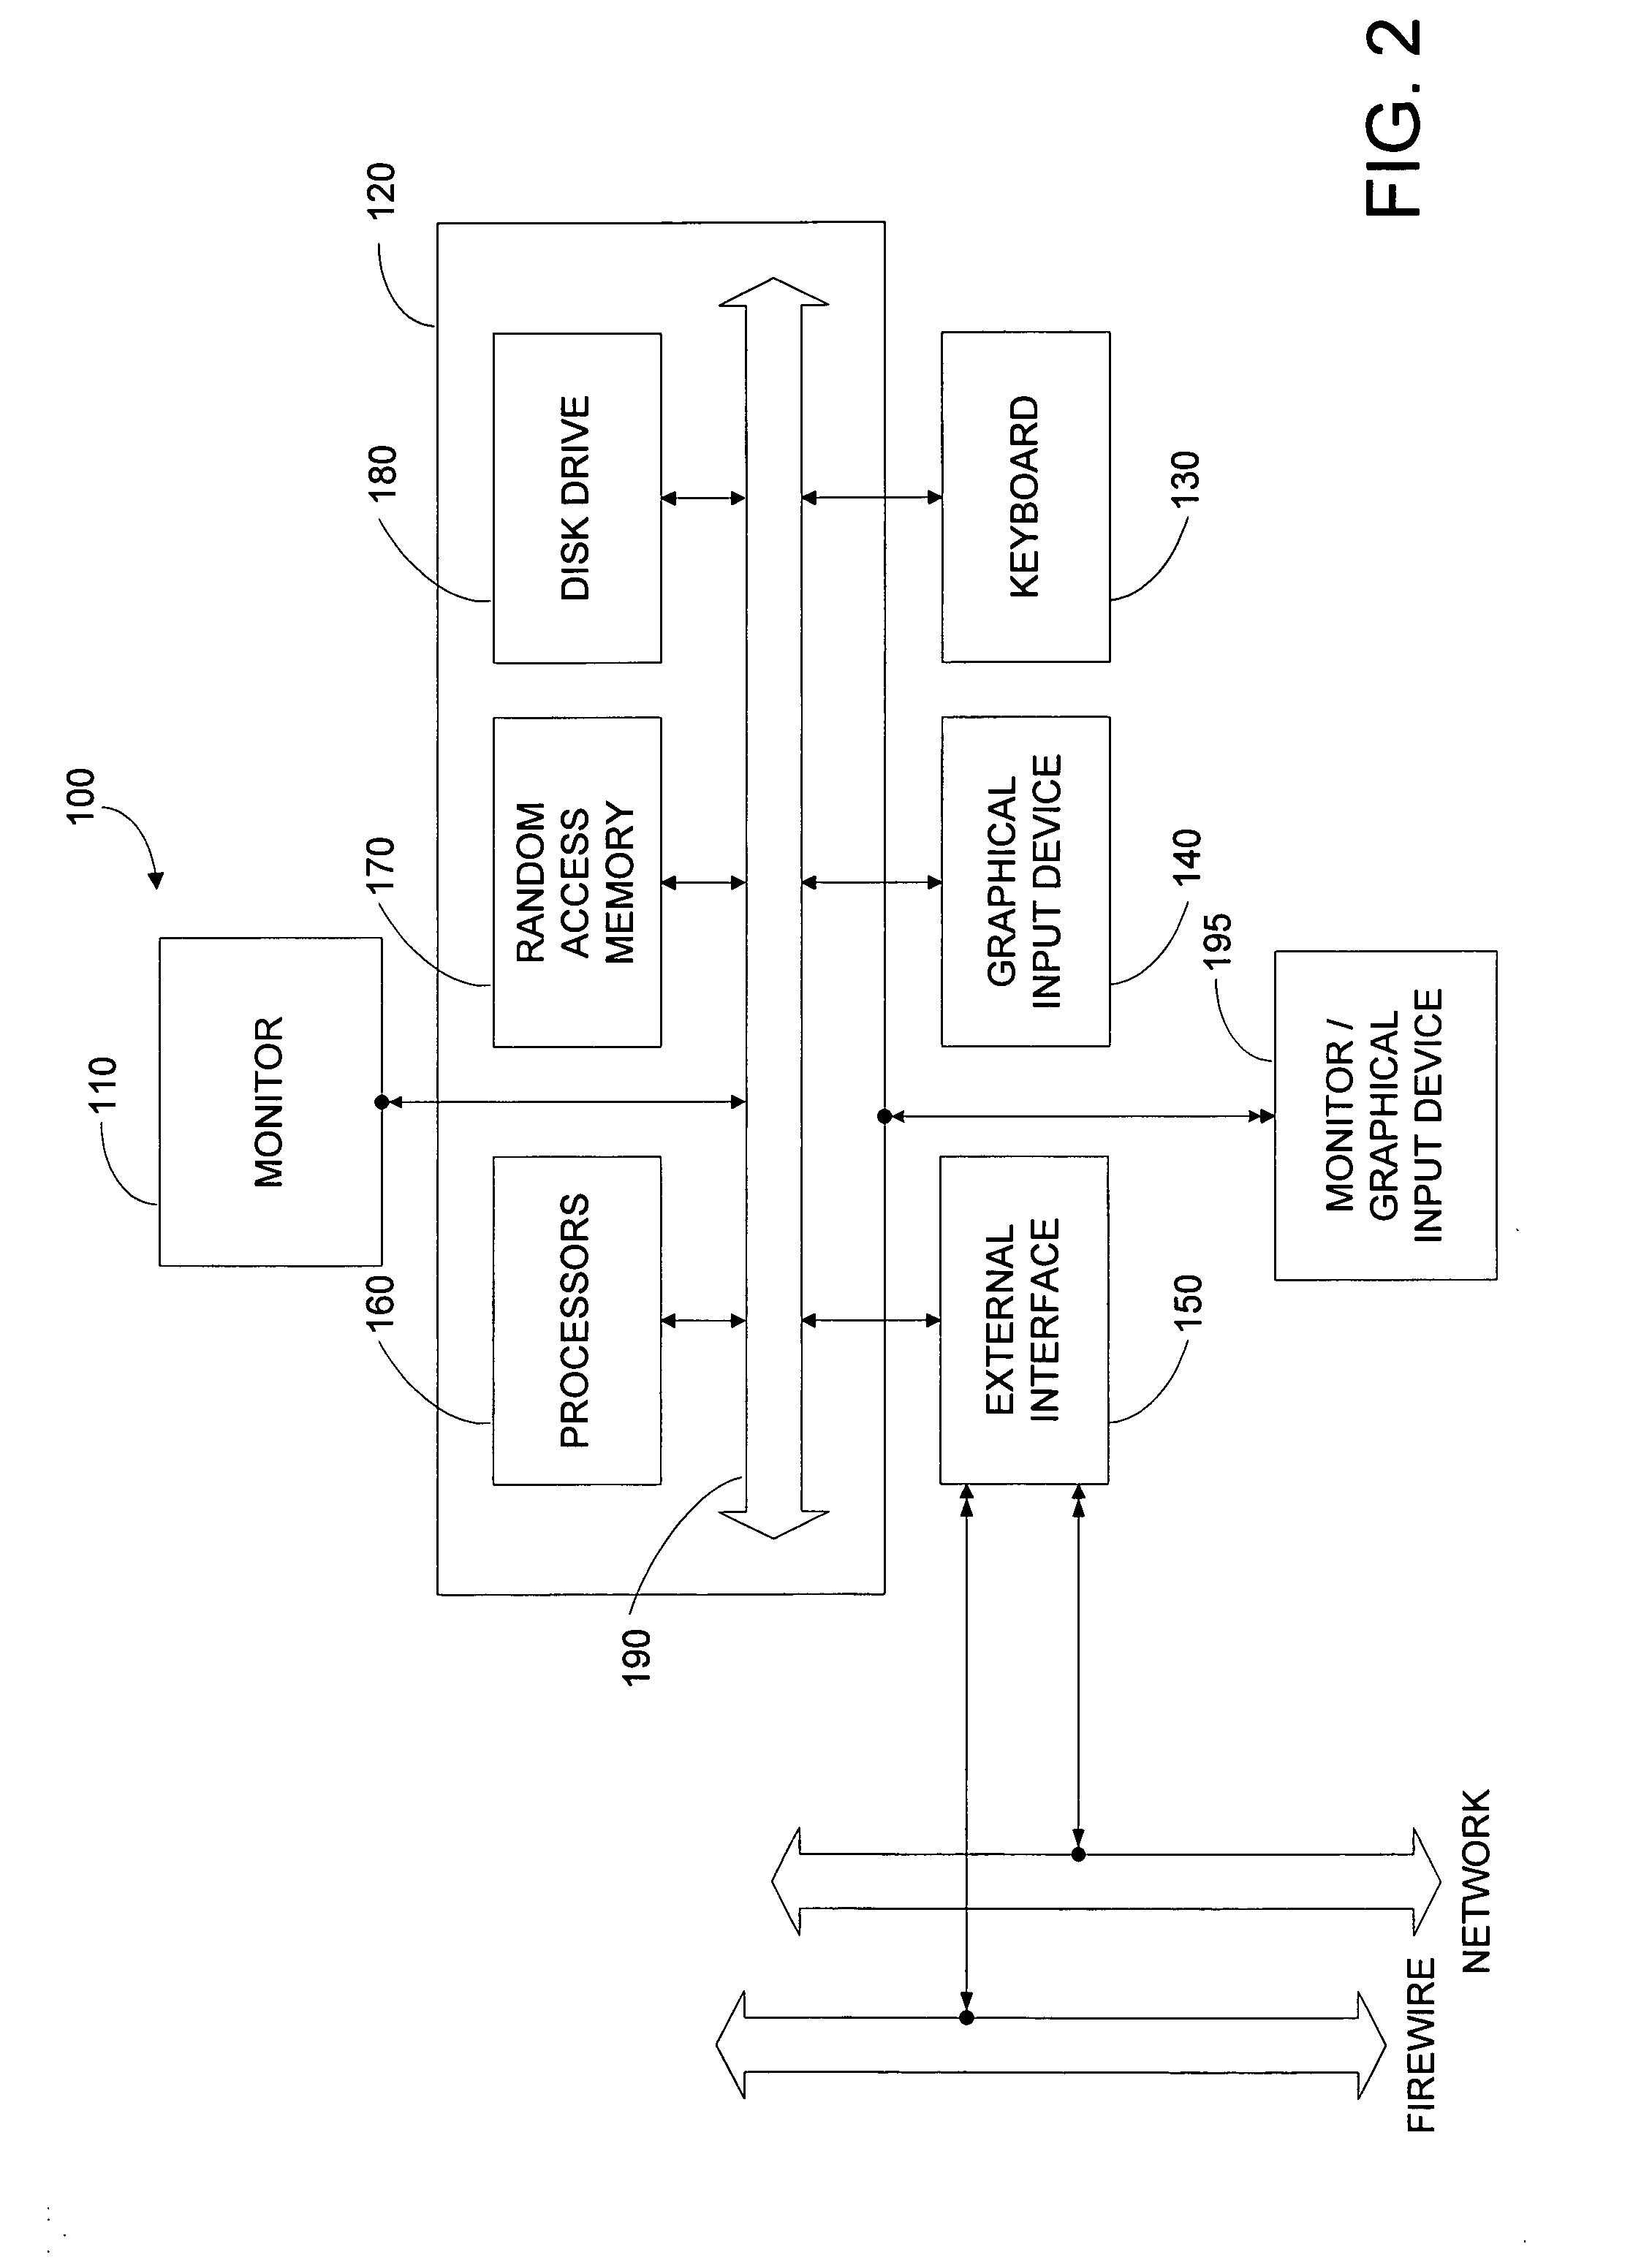 Animation review methods and apparatus